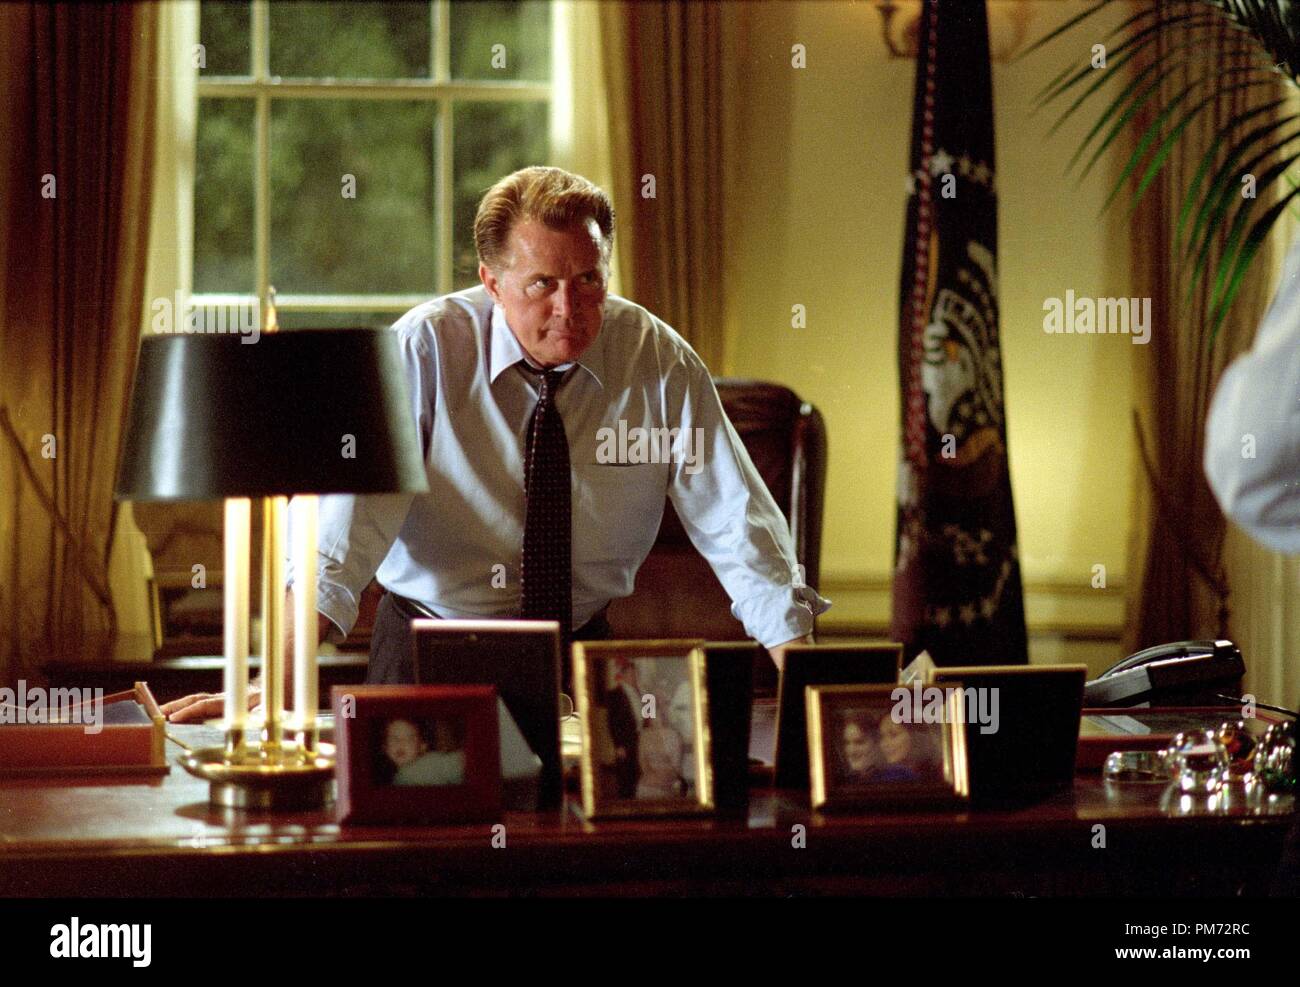 Film Still / Publicity Still from 'The West Wing' Episode: 'War Crimes' Martin Sheen November 7, 2001  File Reference # 30847113THA  For Editorial Use Only -  All Rights Reserved Stock Photo